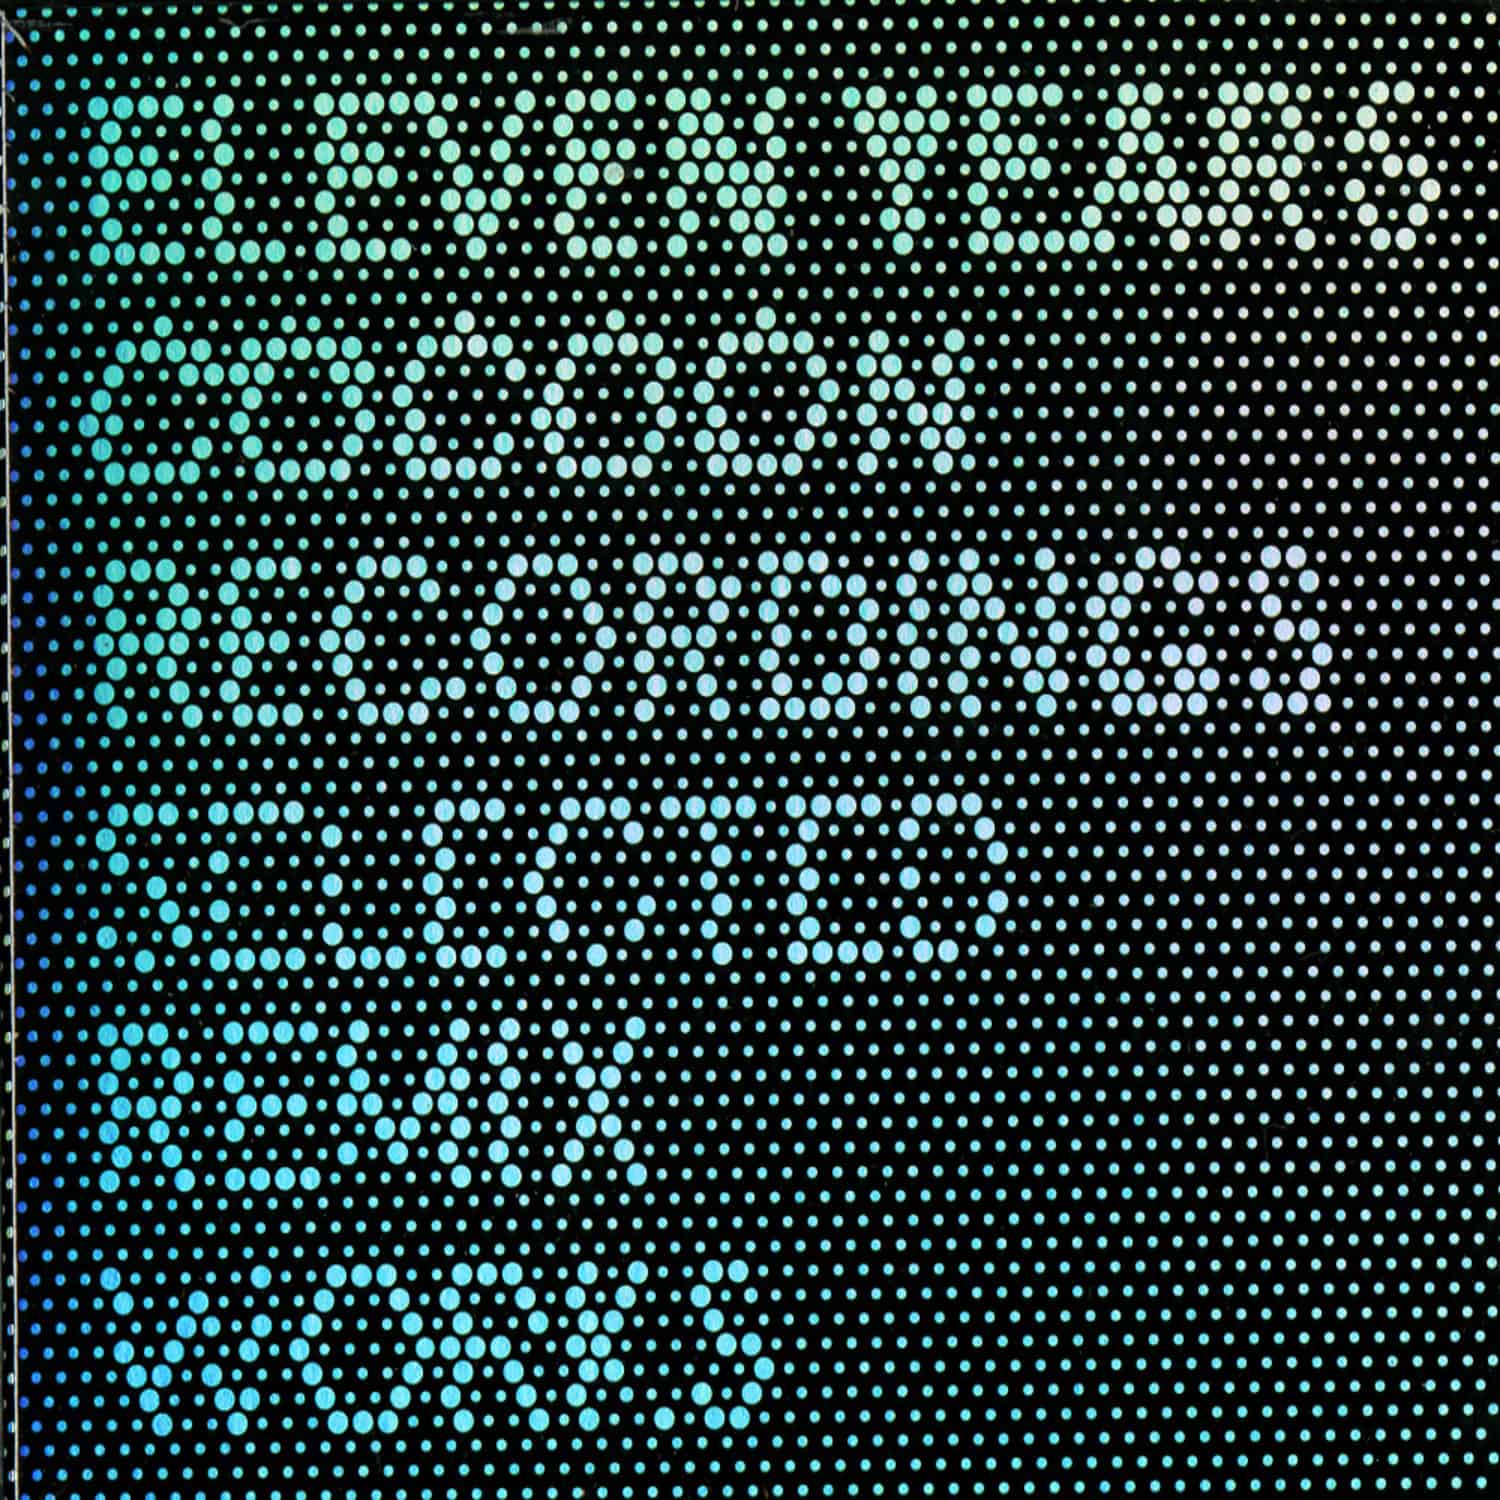 Various Artists - 11 YEARS COCOON RECORDINGS - SELECTED REMIX WORKS 